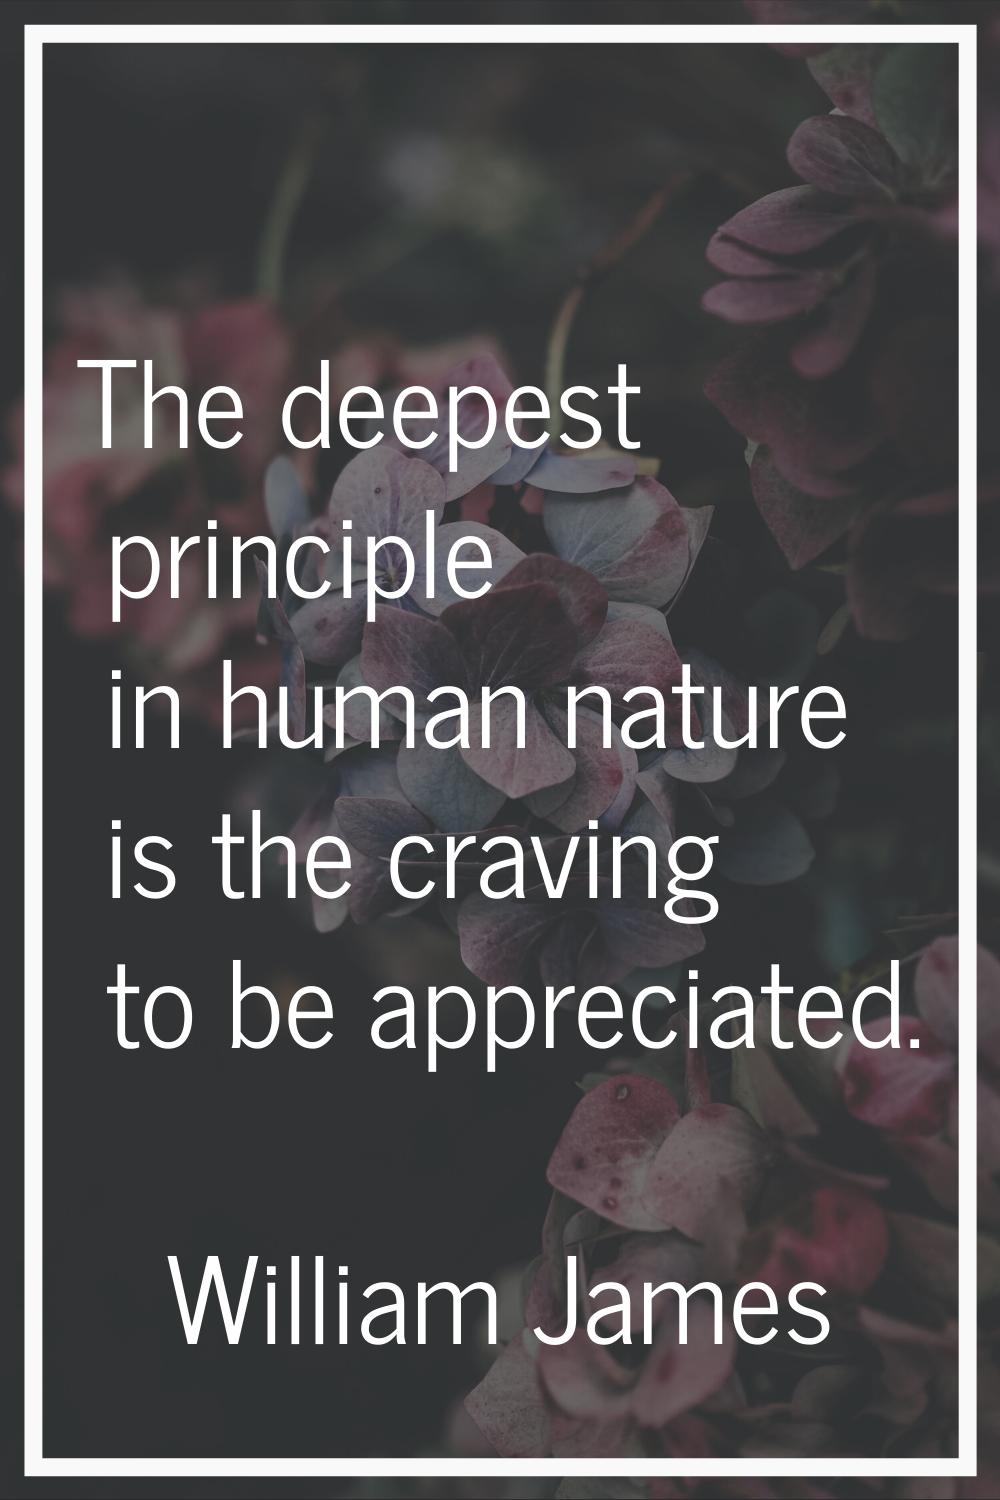 The deepest principle in human nature is the craving to be appreciated.